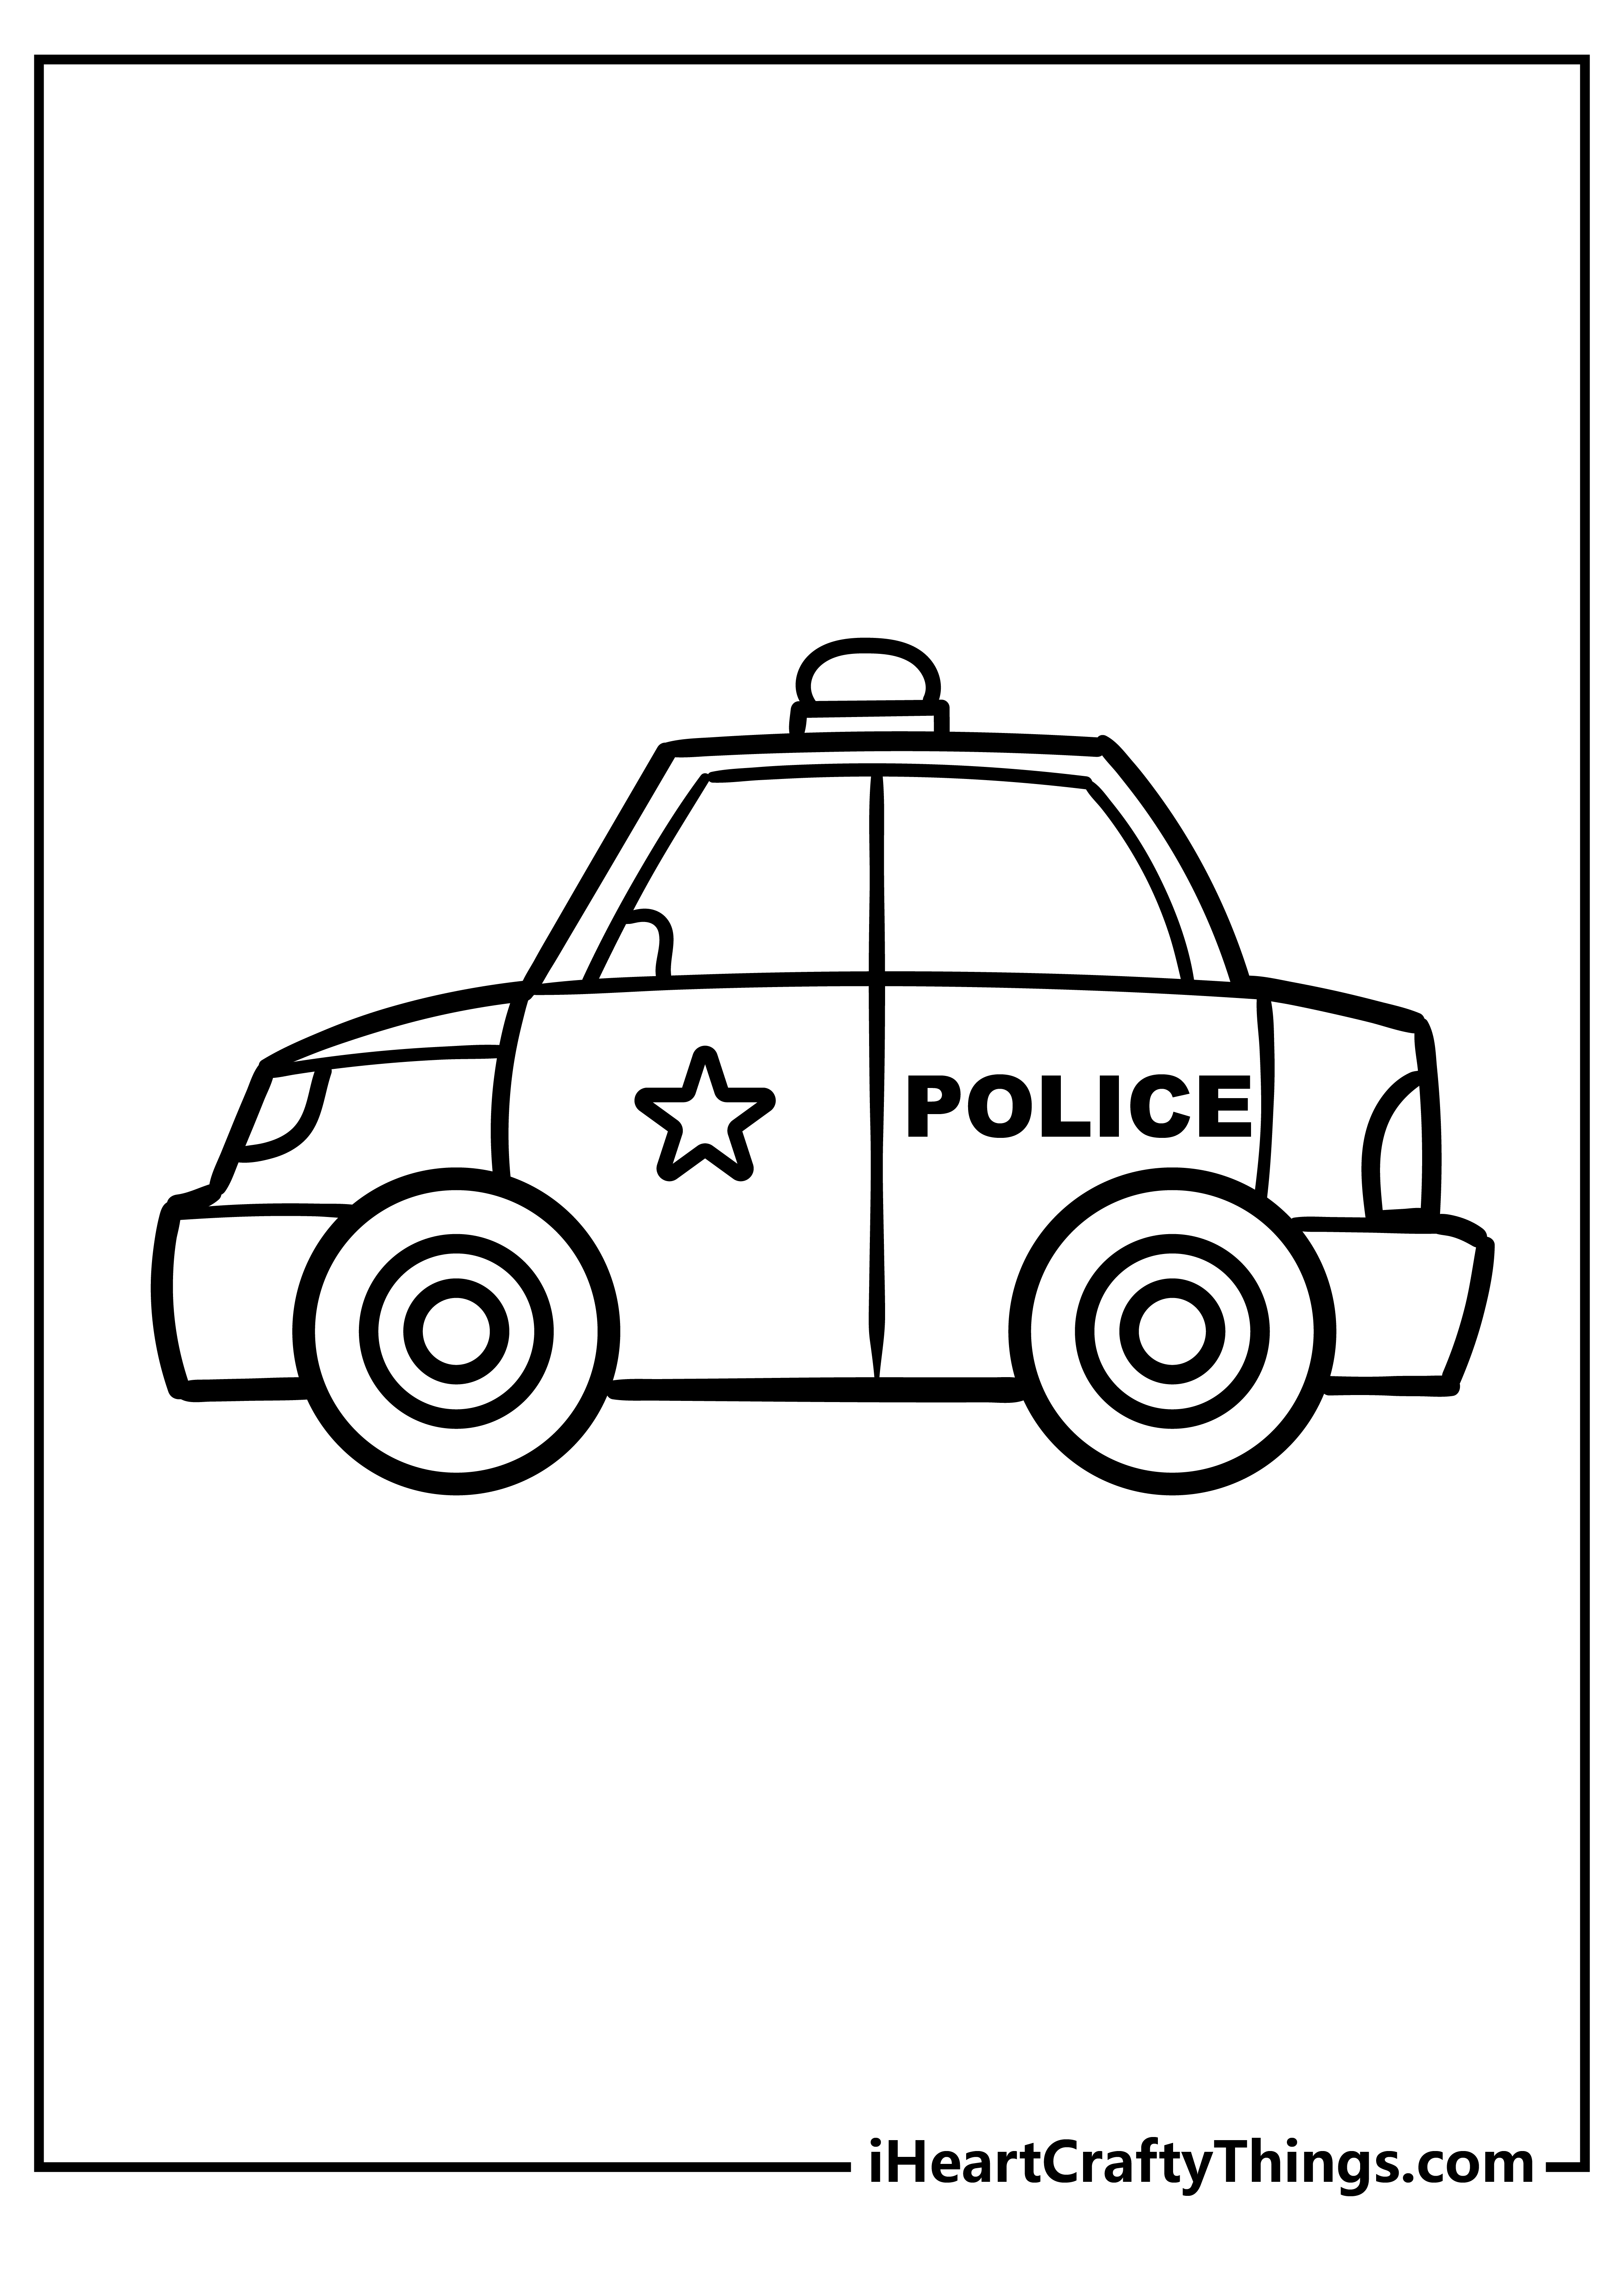 Police Car Coloring Pages for preschoolers free printable